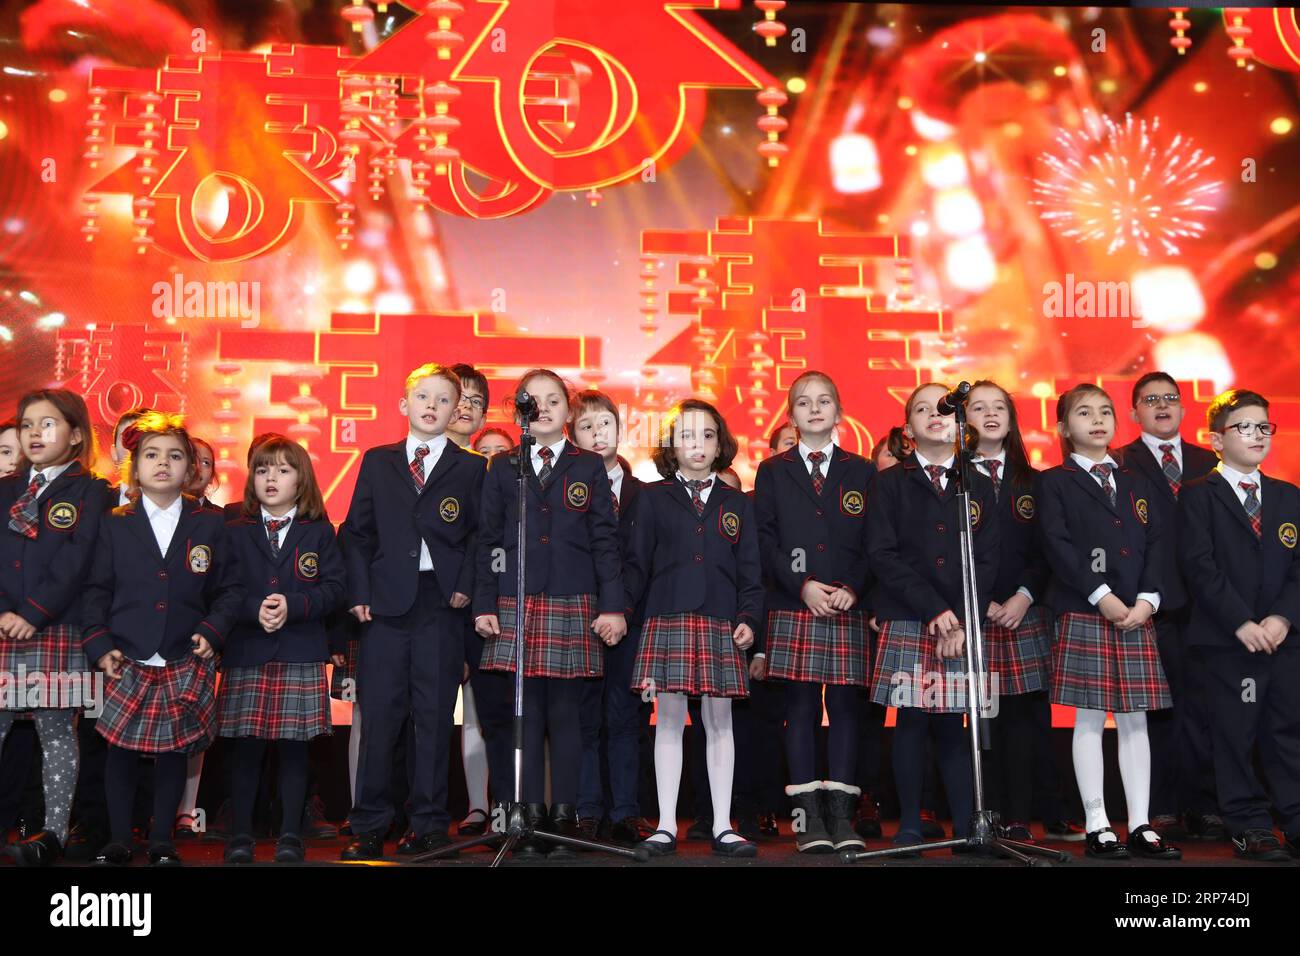 (190127) -- SOFIA, Jan. 27, 2019 (Xinhua) -- Bulgarian children sing in a gala show titled Let s Share the Chinese New Year Together in Sofia, Bulgaria, Jan. 26, 2019. Some 500 Bulgarians and Chinese attended the gala show to celebrate the upcoming Spring Festival. The event, jointly organized by the China Cultural Center, Confucius Institute in Sofia, and city government departments of Ningbo and Quanzhou, was also dedicated to the 70th anniversary of the establishment of diplomatic relations between the People s Republic of China and Bulgaria. (Xinhua/Zhan Xiaoyi) BULGARIA-SOFIA-GALA SHOW-CH Stock Photo